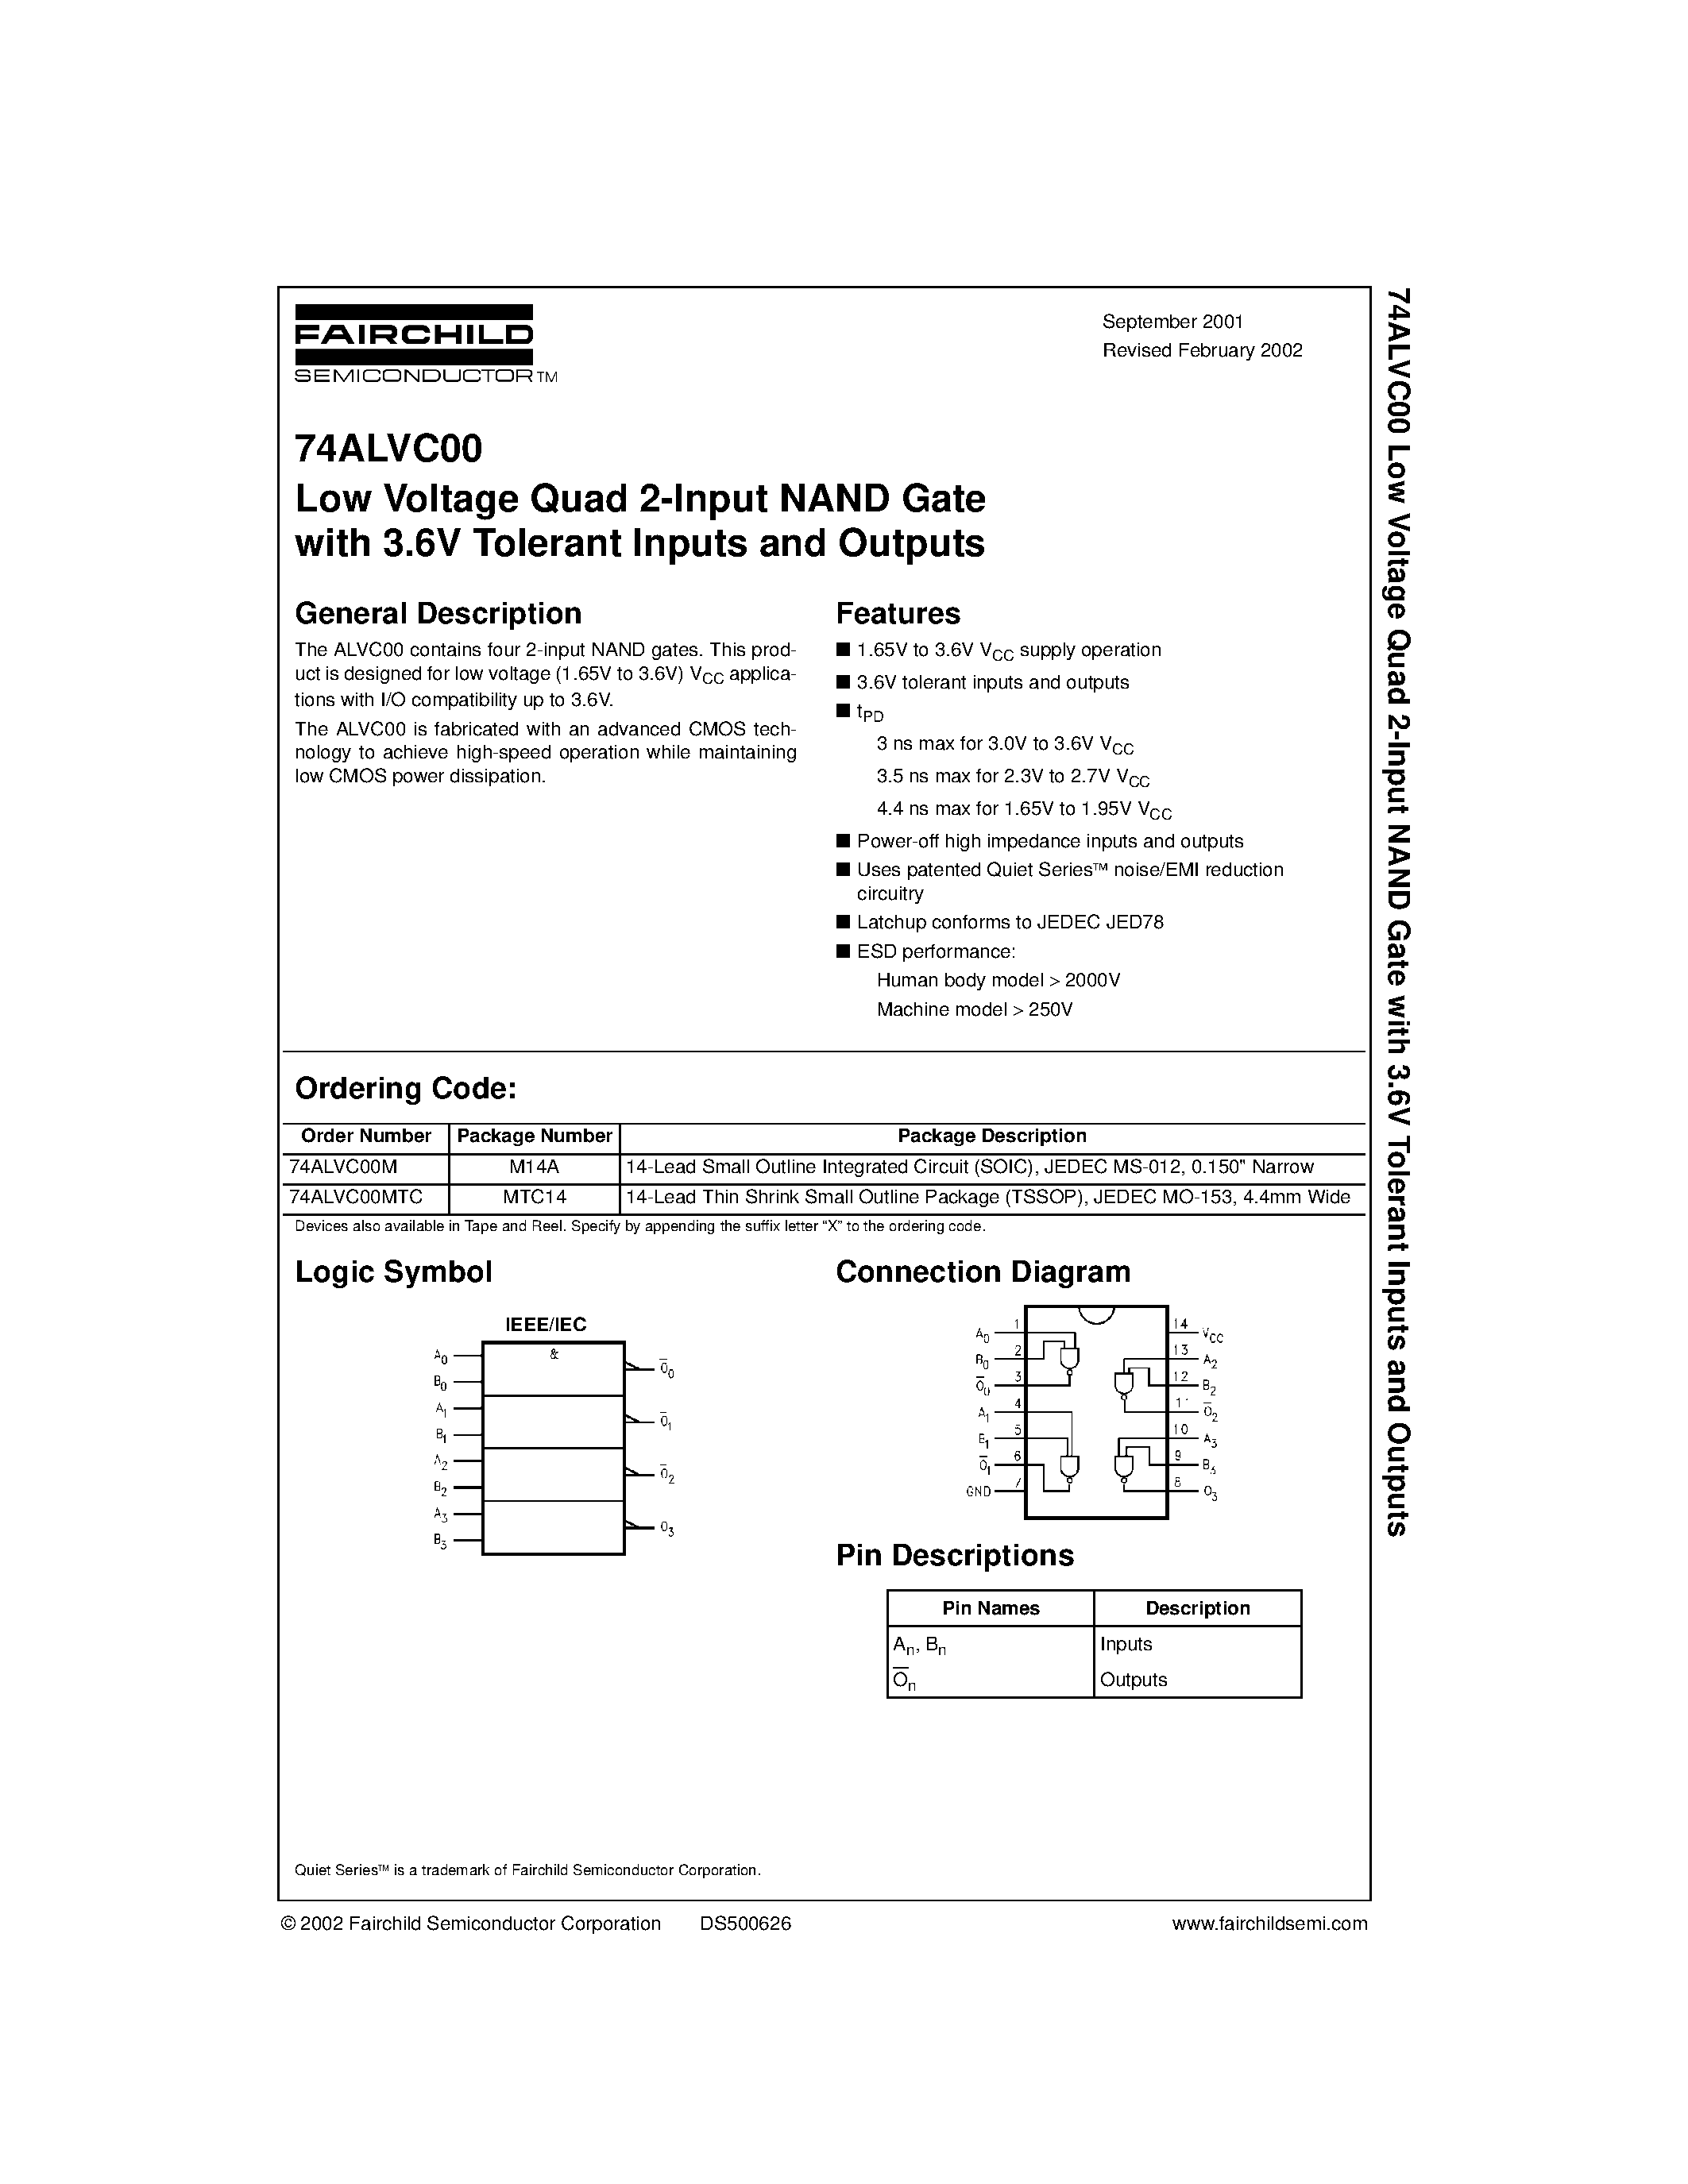 Datasheet 74ALVC00 - Low Voltage Quad 2-Input NAND Gate with 3.6V Tolerant Inputs and Outputs page 1